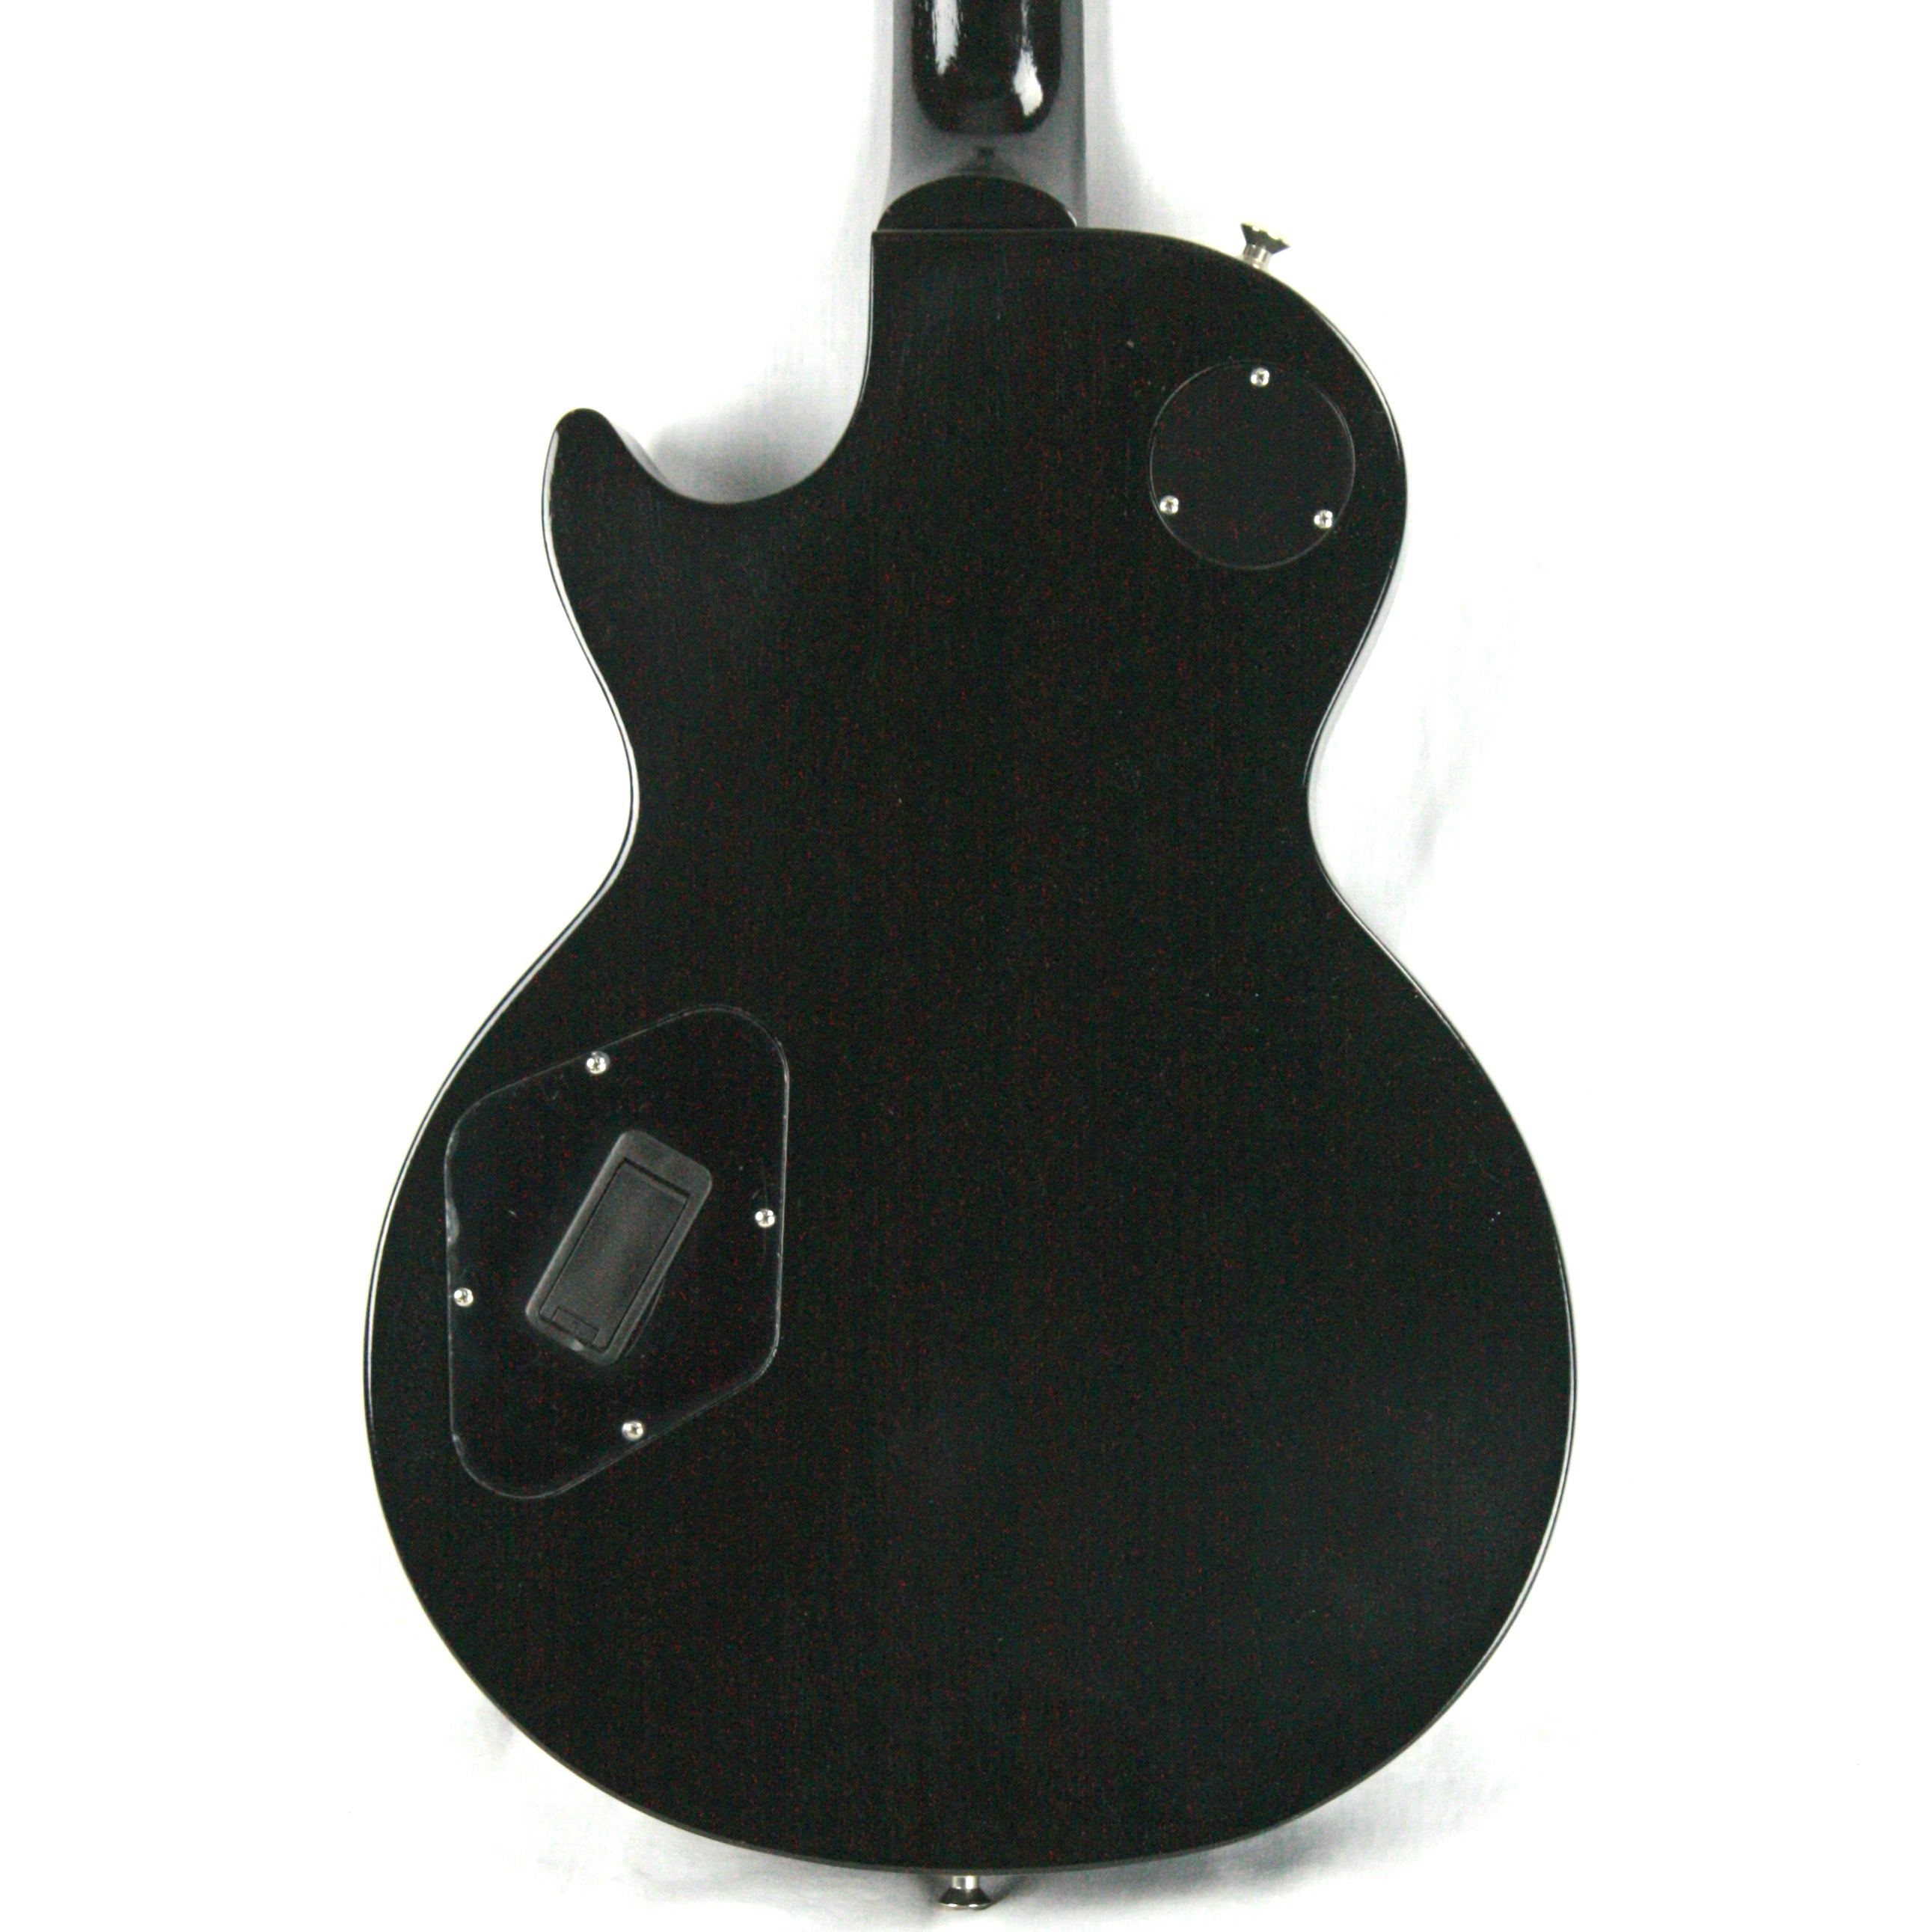 *SOLD*  2012 Gibson Paul Landers Signature Les Paul! Rammstein! EMG's Satin Black! EXTREMELY RARE!